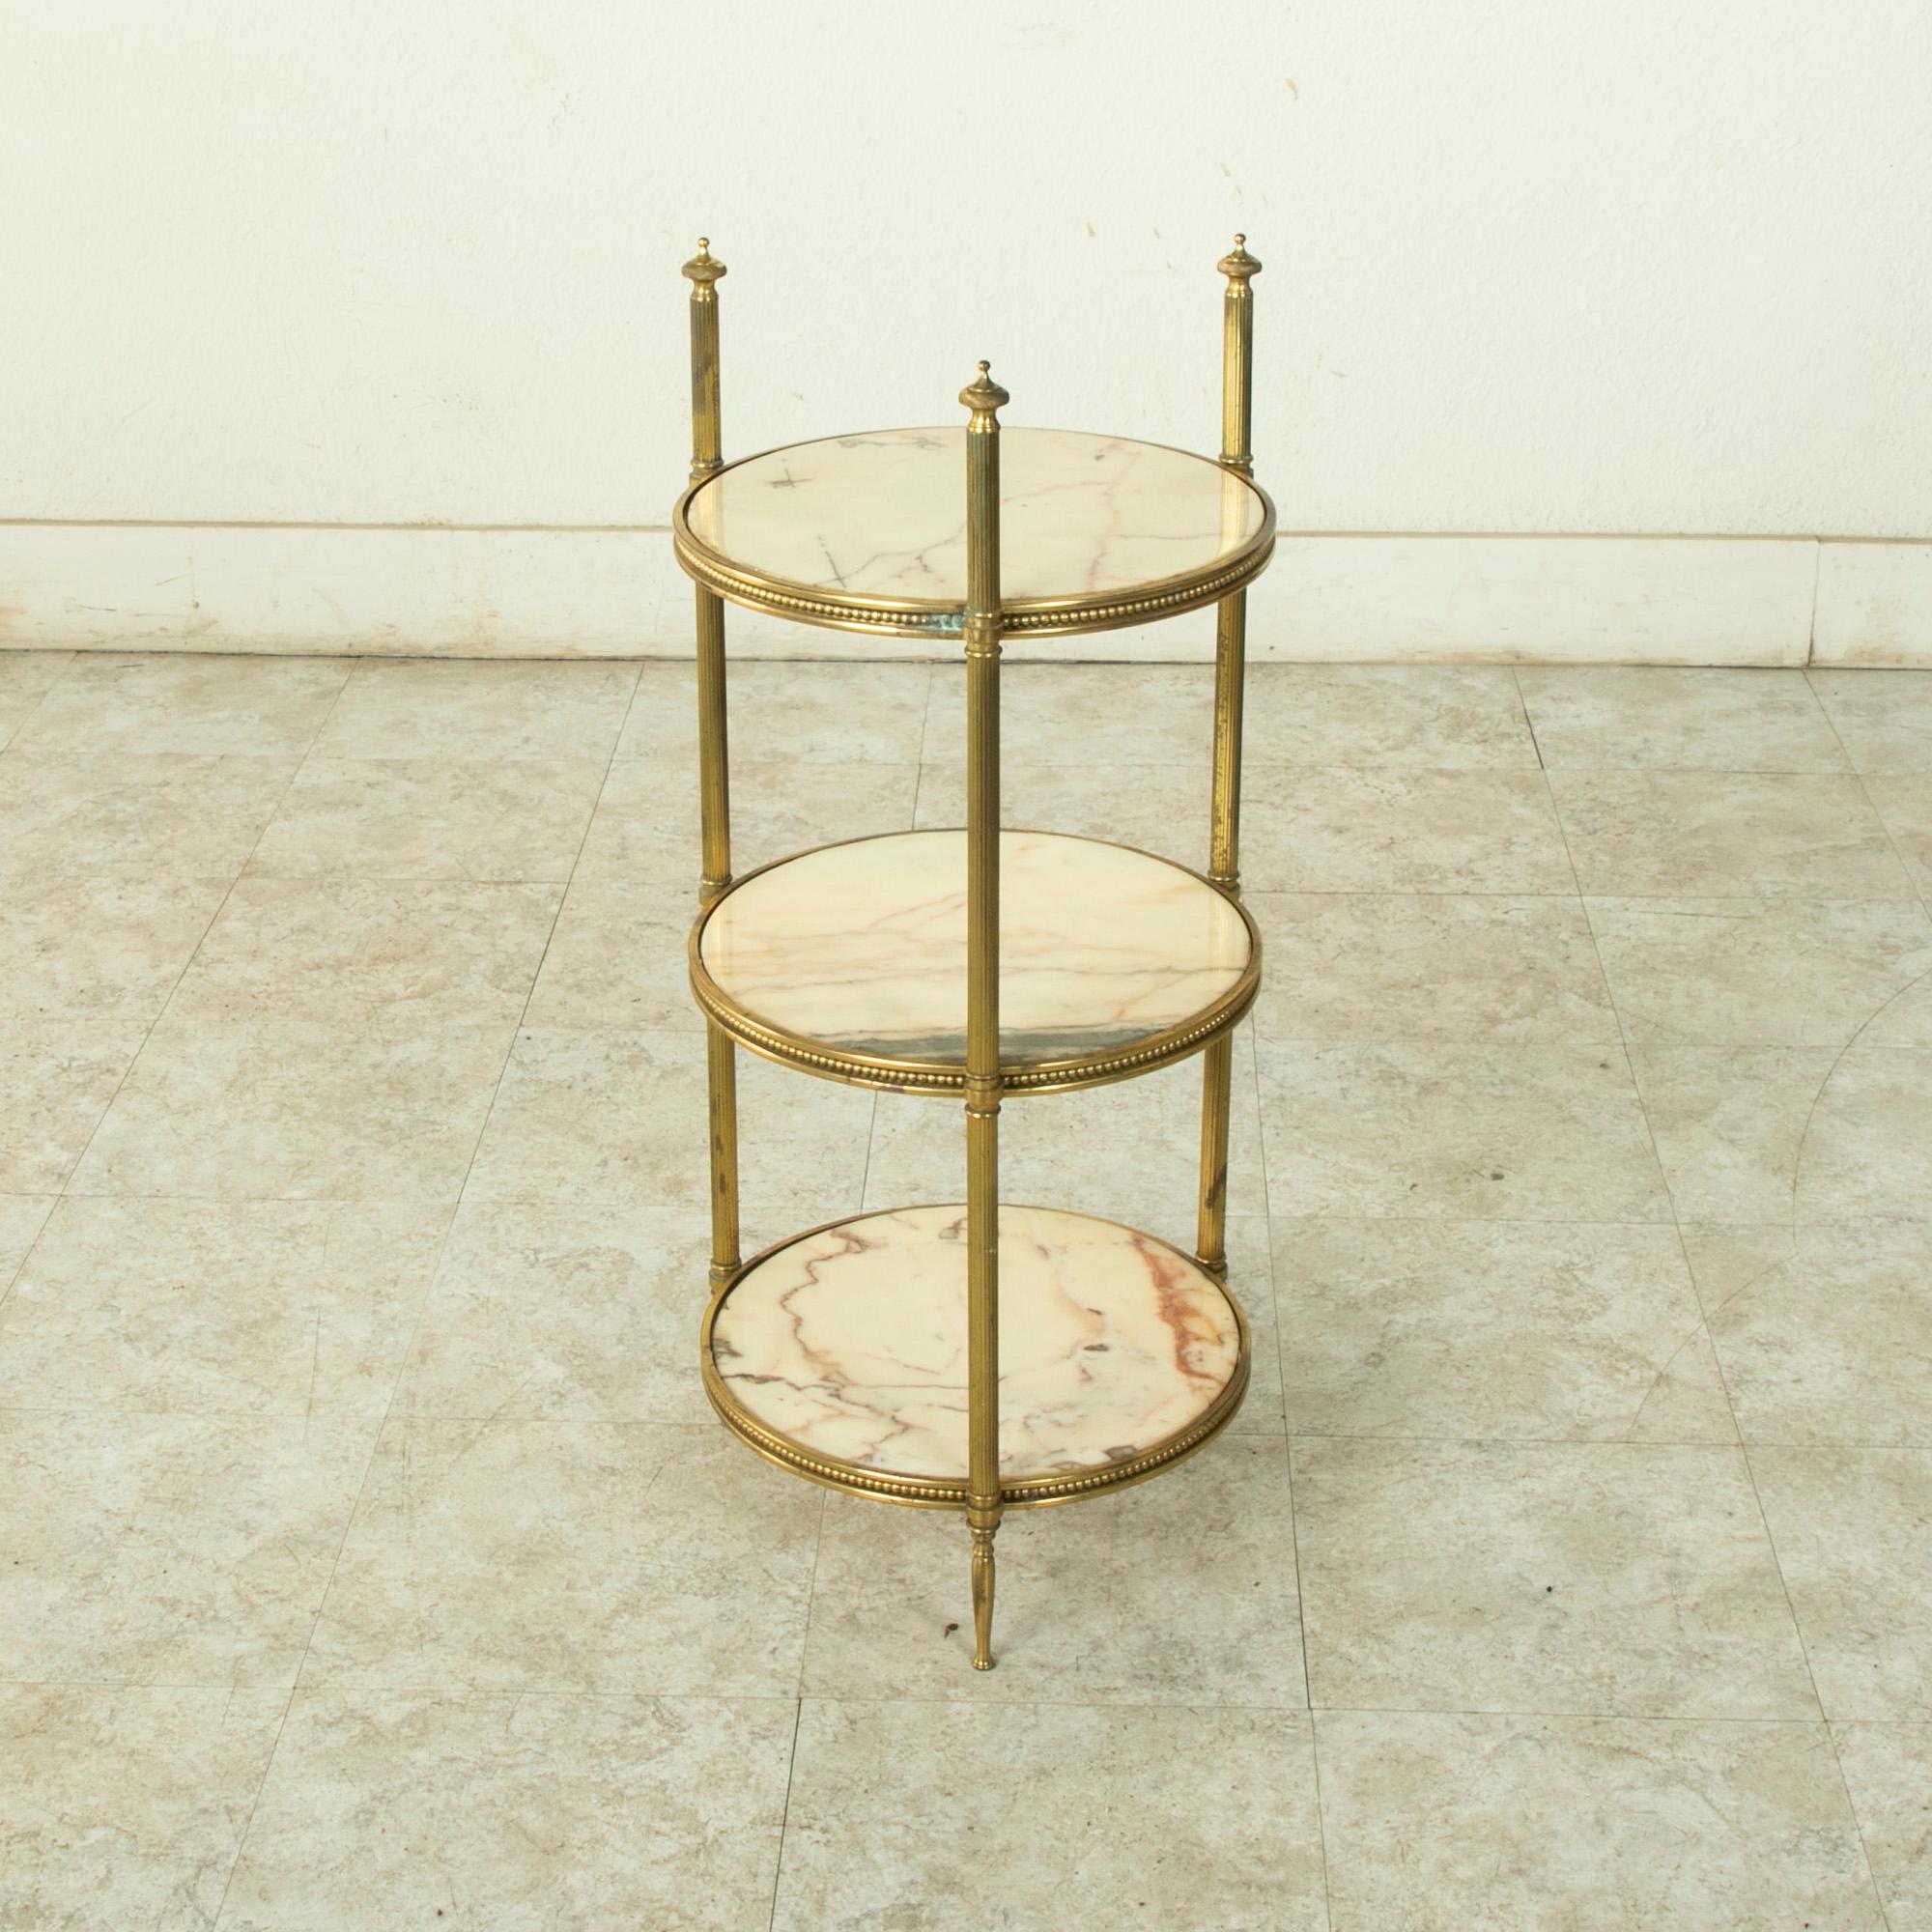 Originally used in a French pastry shop for display on top of the counter, this early twentieth century brass presentation server features three marble shelves. The shelves rest on brass circular supports detailed with beading. The three fluted